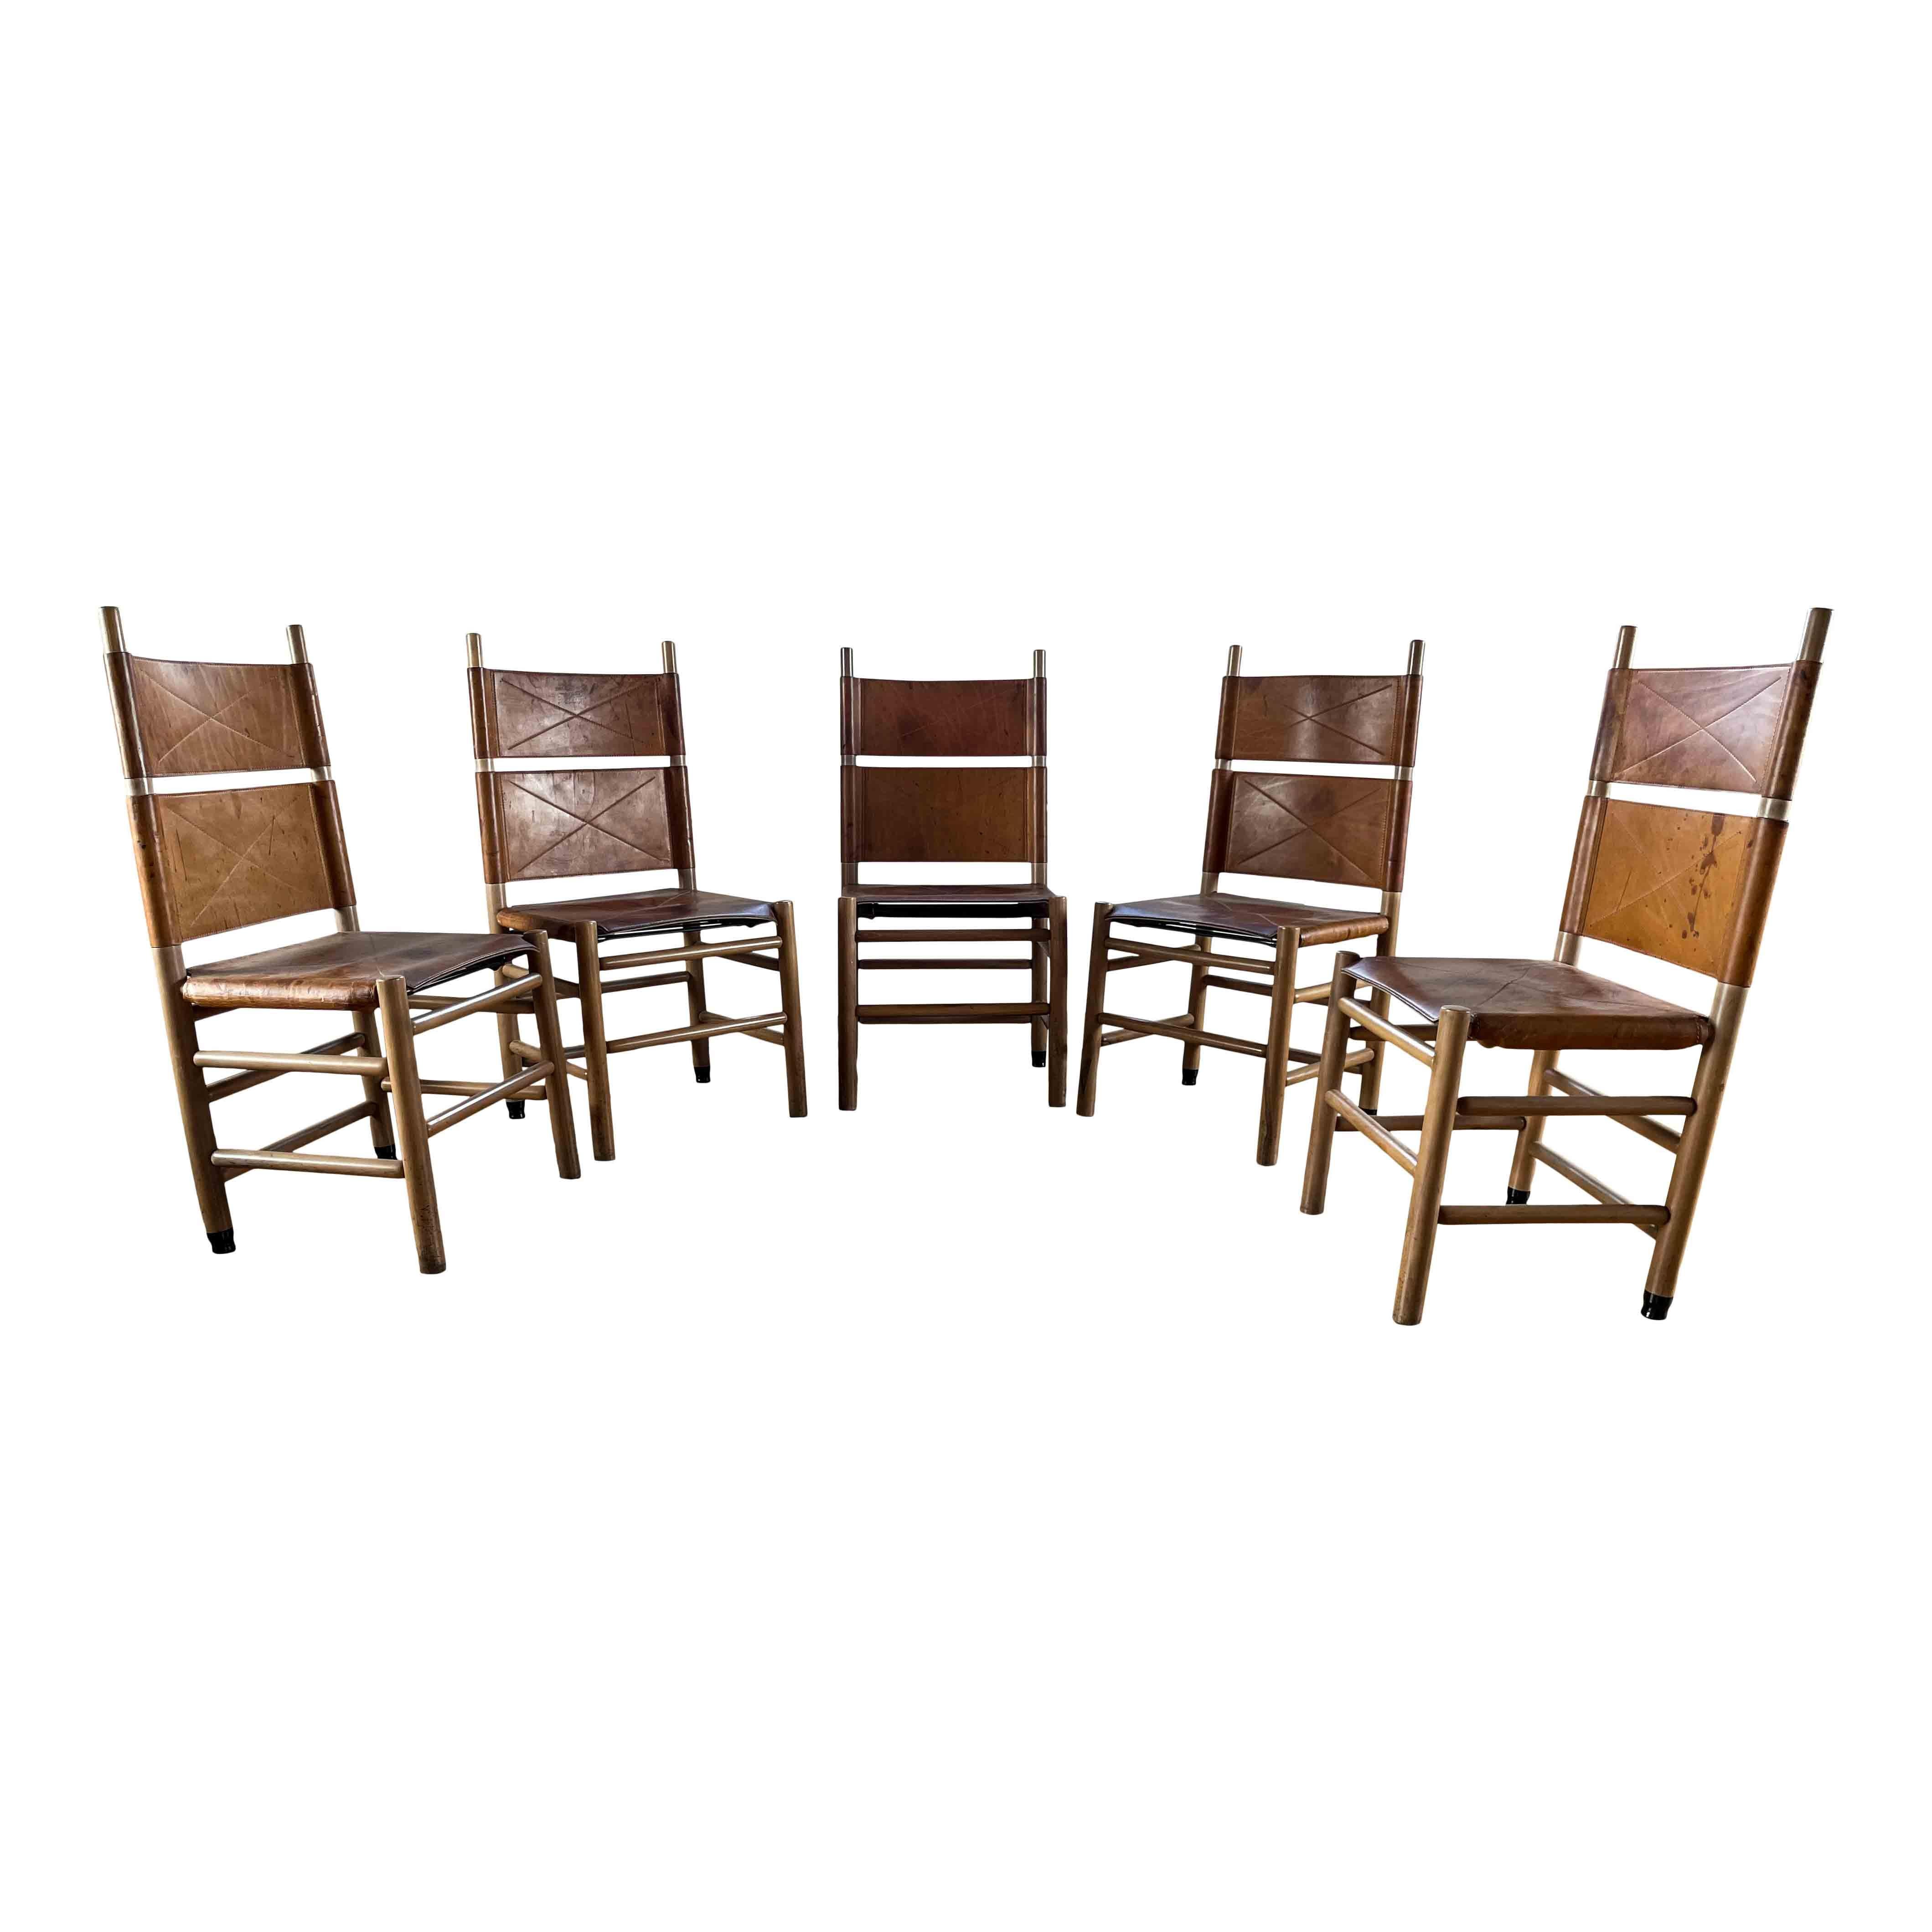 Walnut Carlo Scarpa Cognac Leather “Kentucky” Dining Chair for Bernini, 1977, Set of 5 For Sale